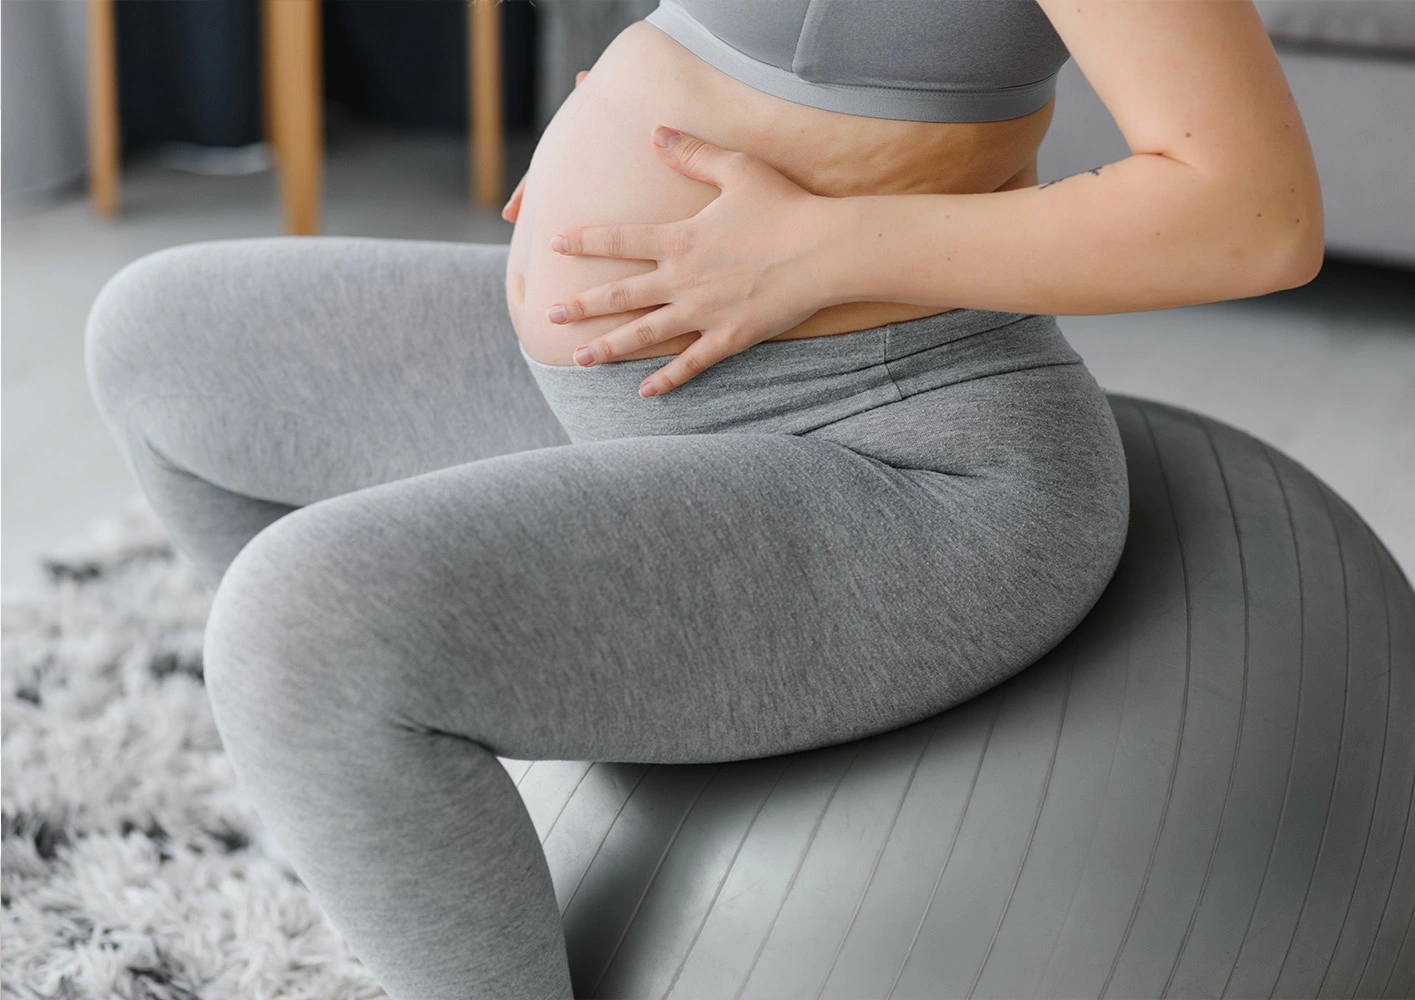 Is Exercise In Pregnancy Safe? Guest Post From The Active Pregnancy Foundation